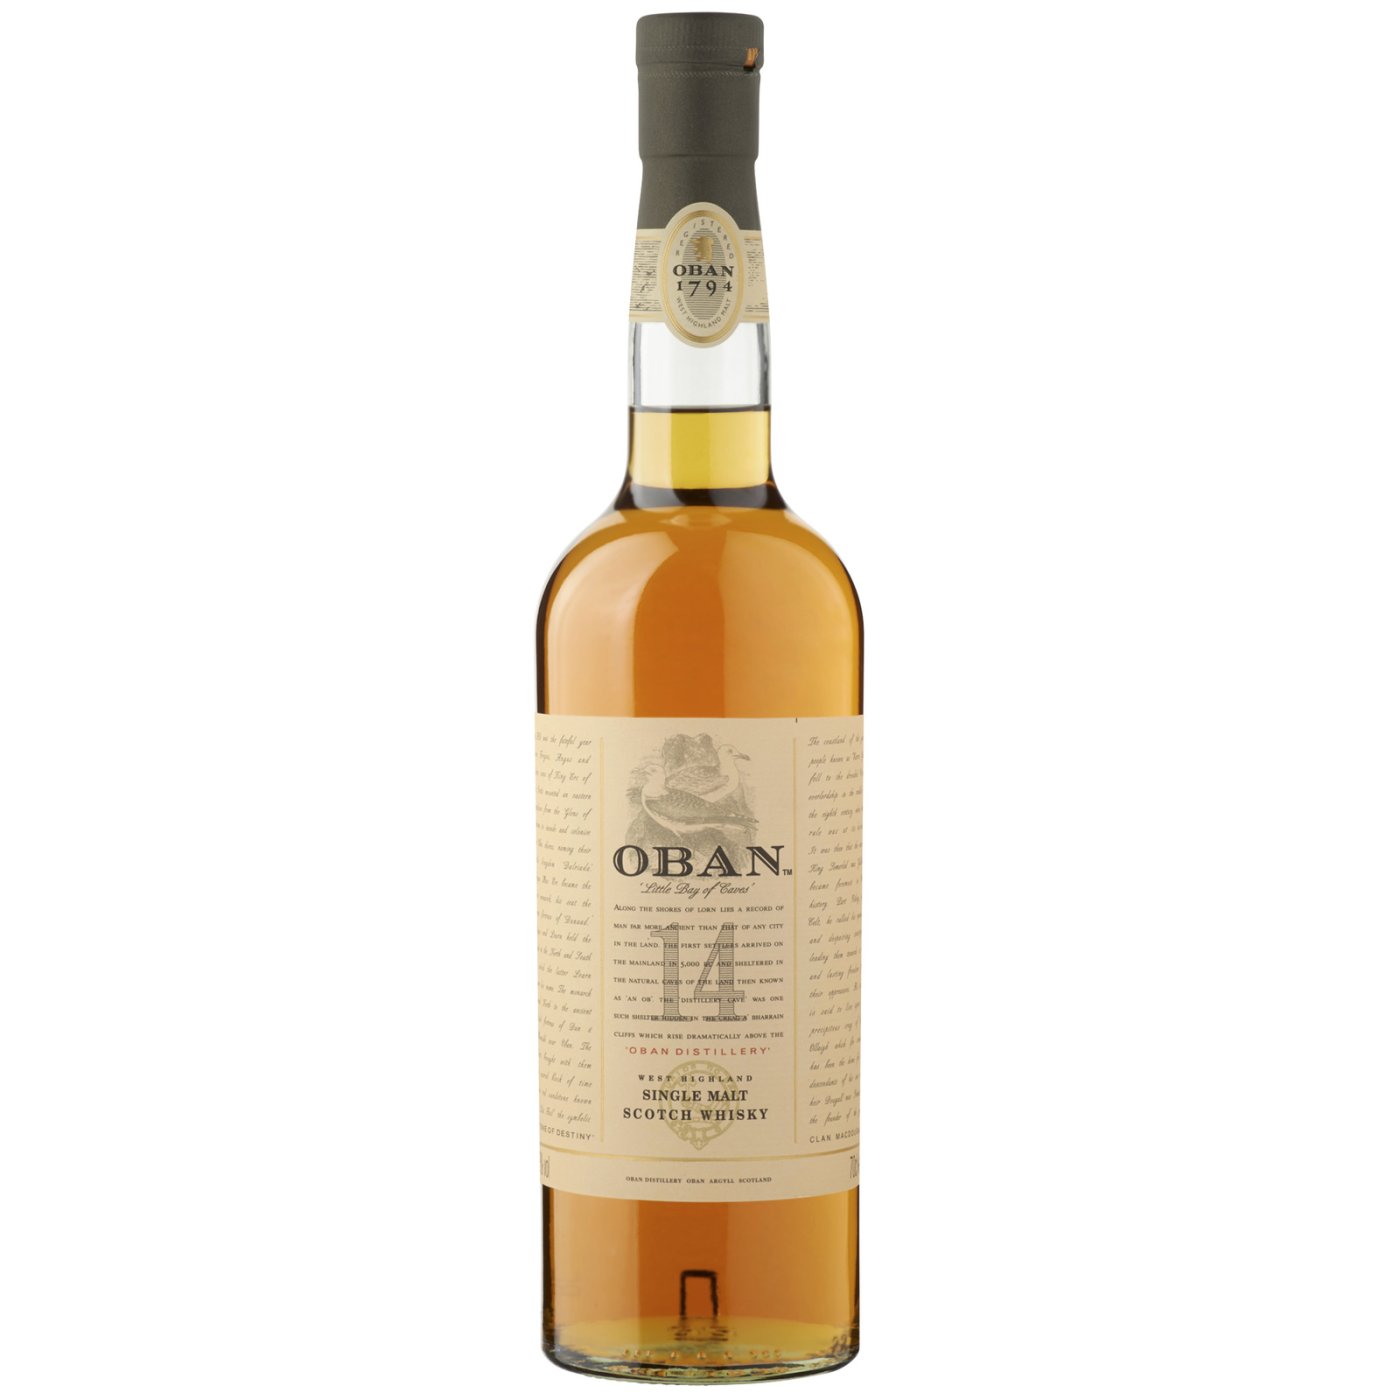 Oban, 14 years 70cl